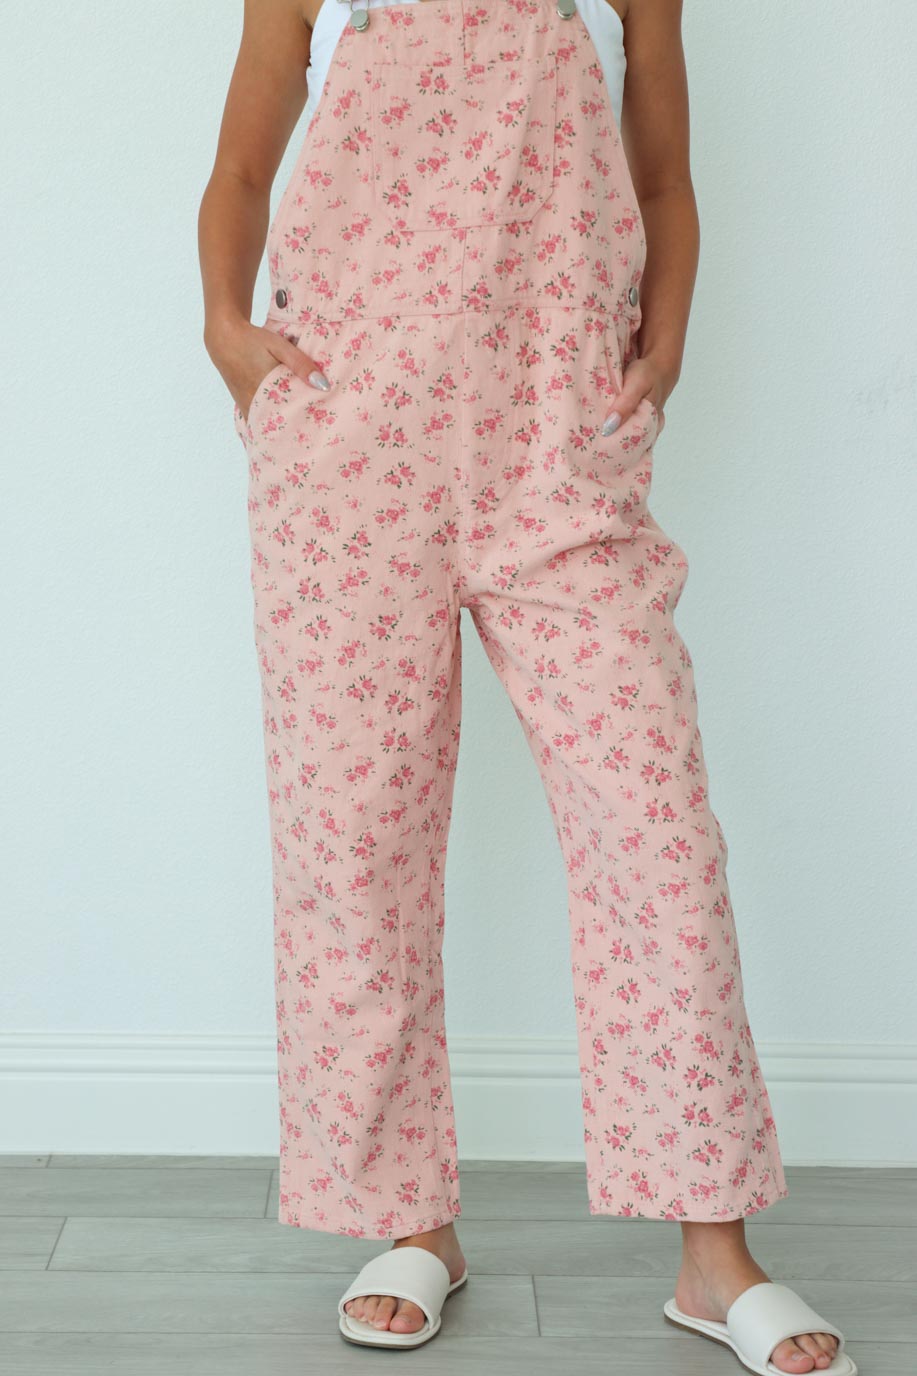 girl wearing long light pink overalls with a floral pattern